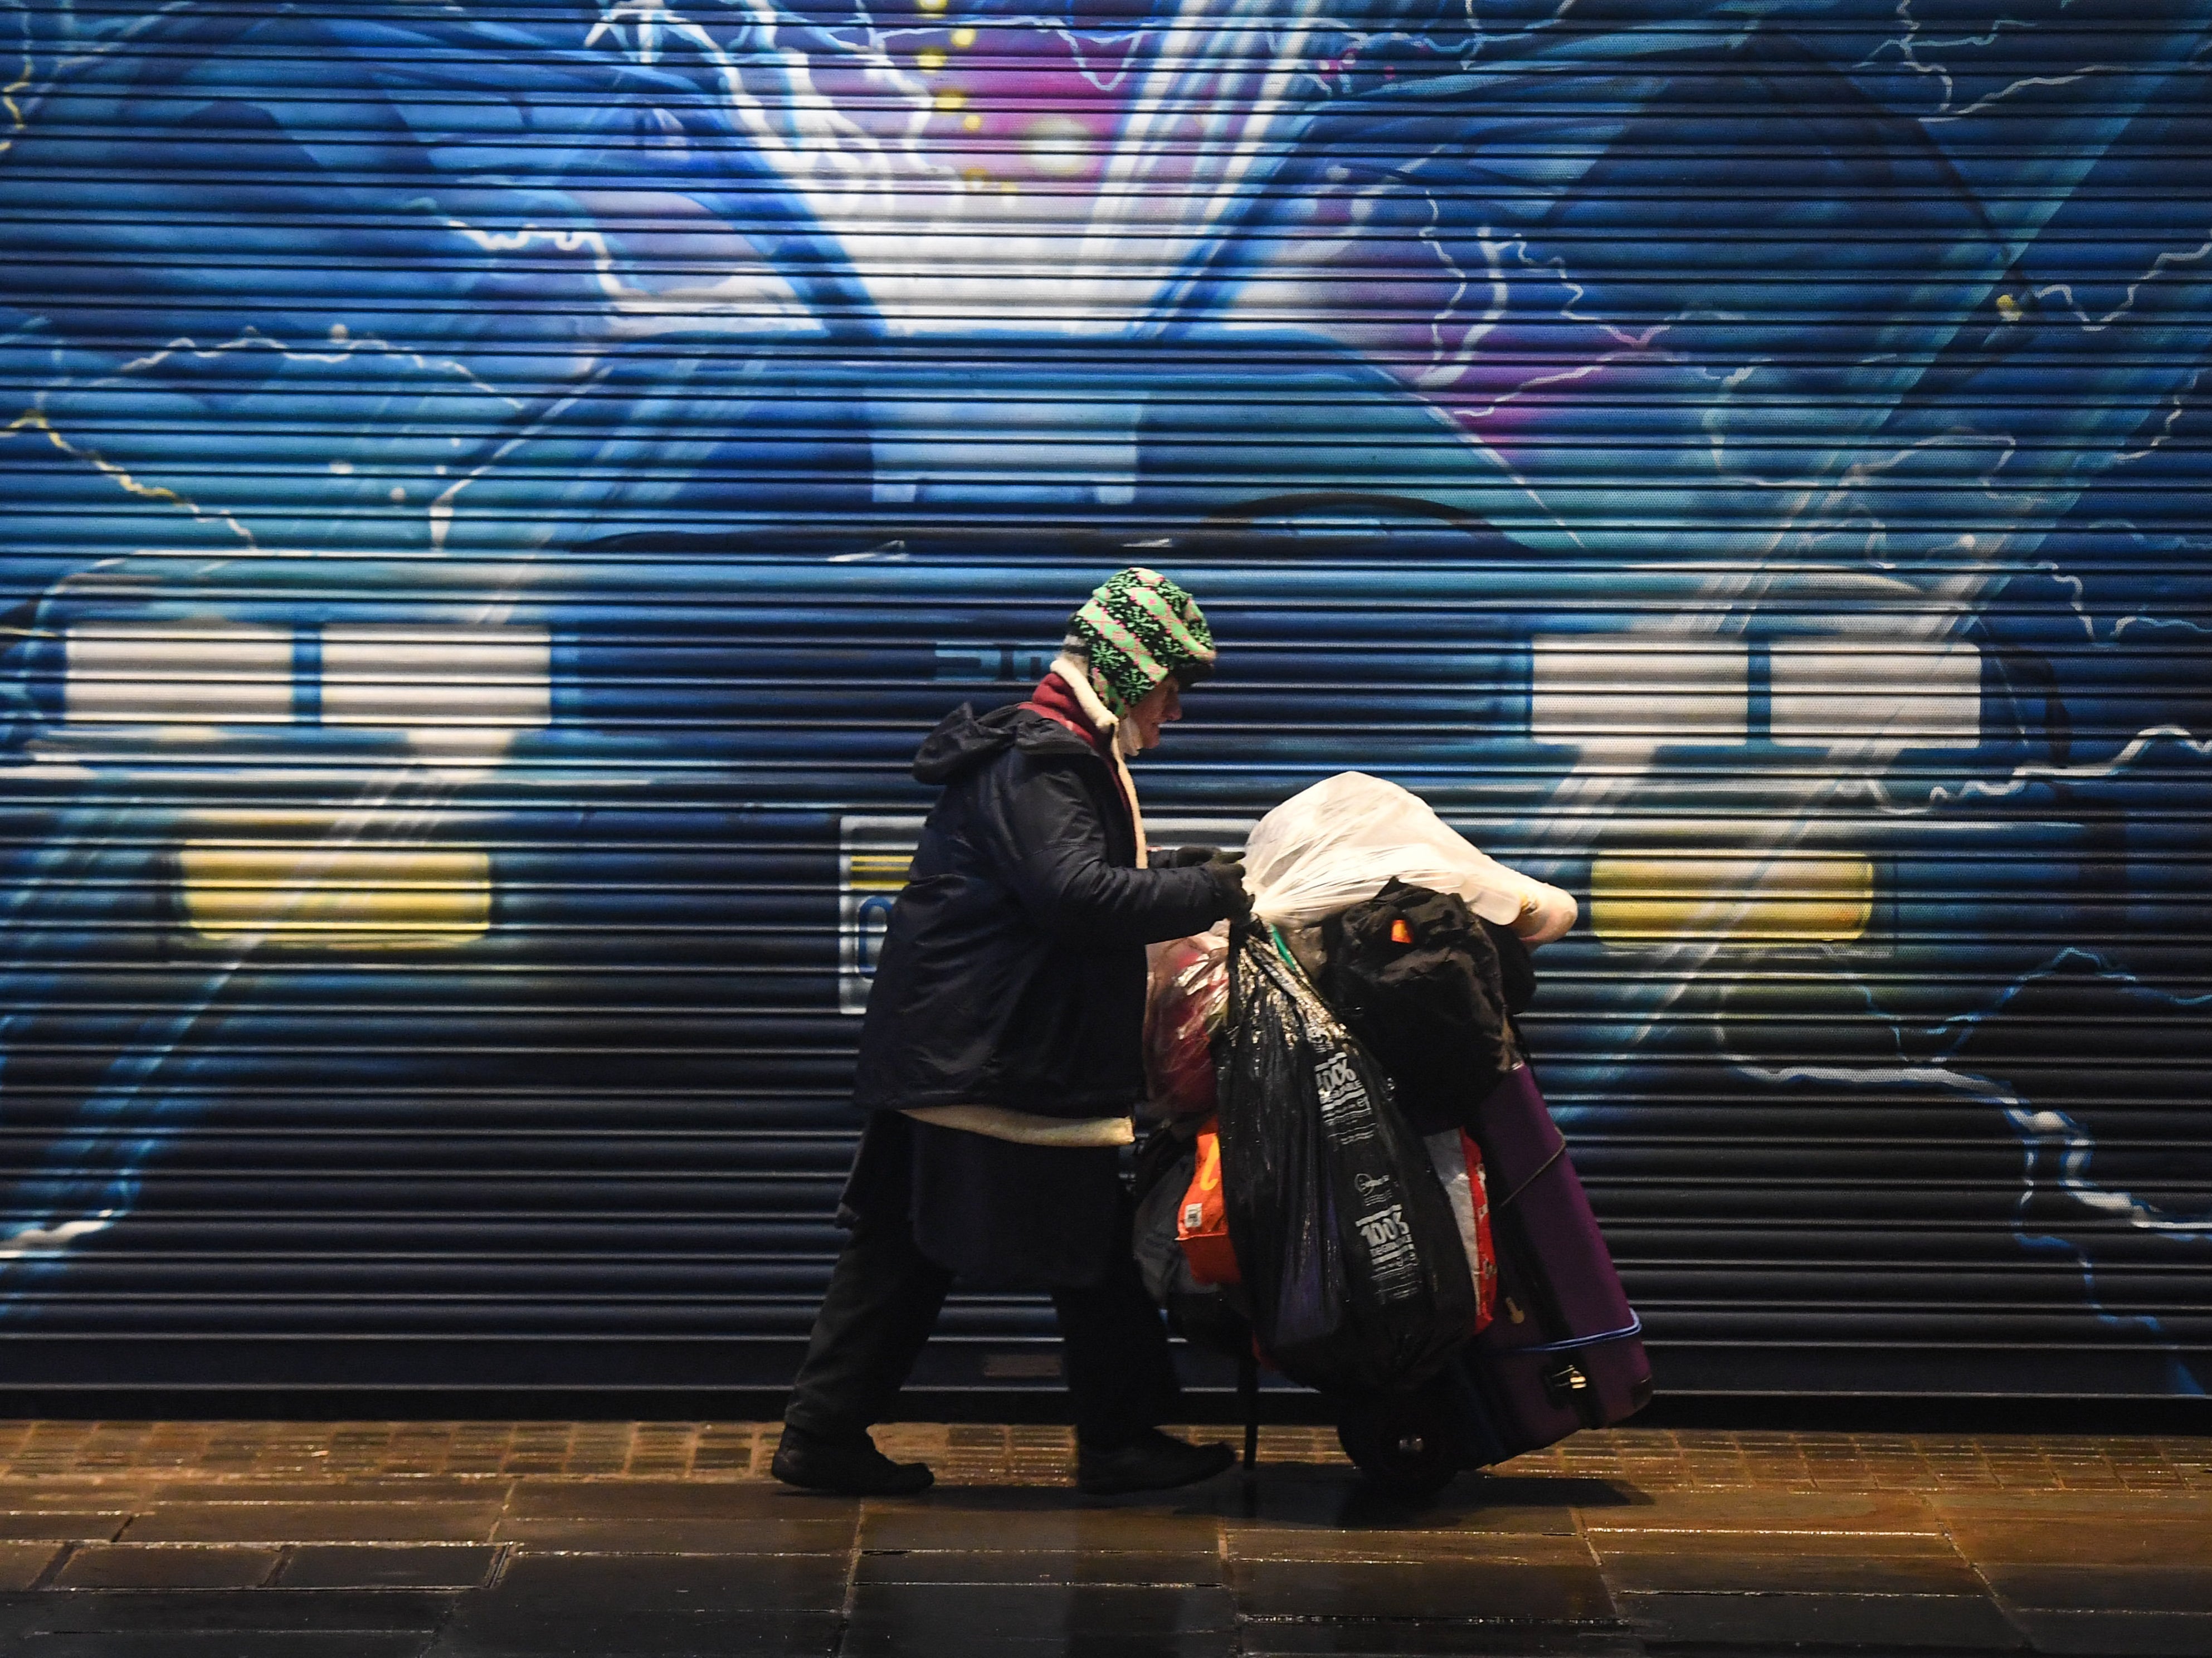 A rough sleeper pushes their belongings past a Back to the Future mural in London on 13 December